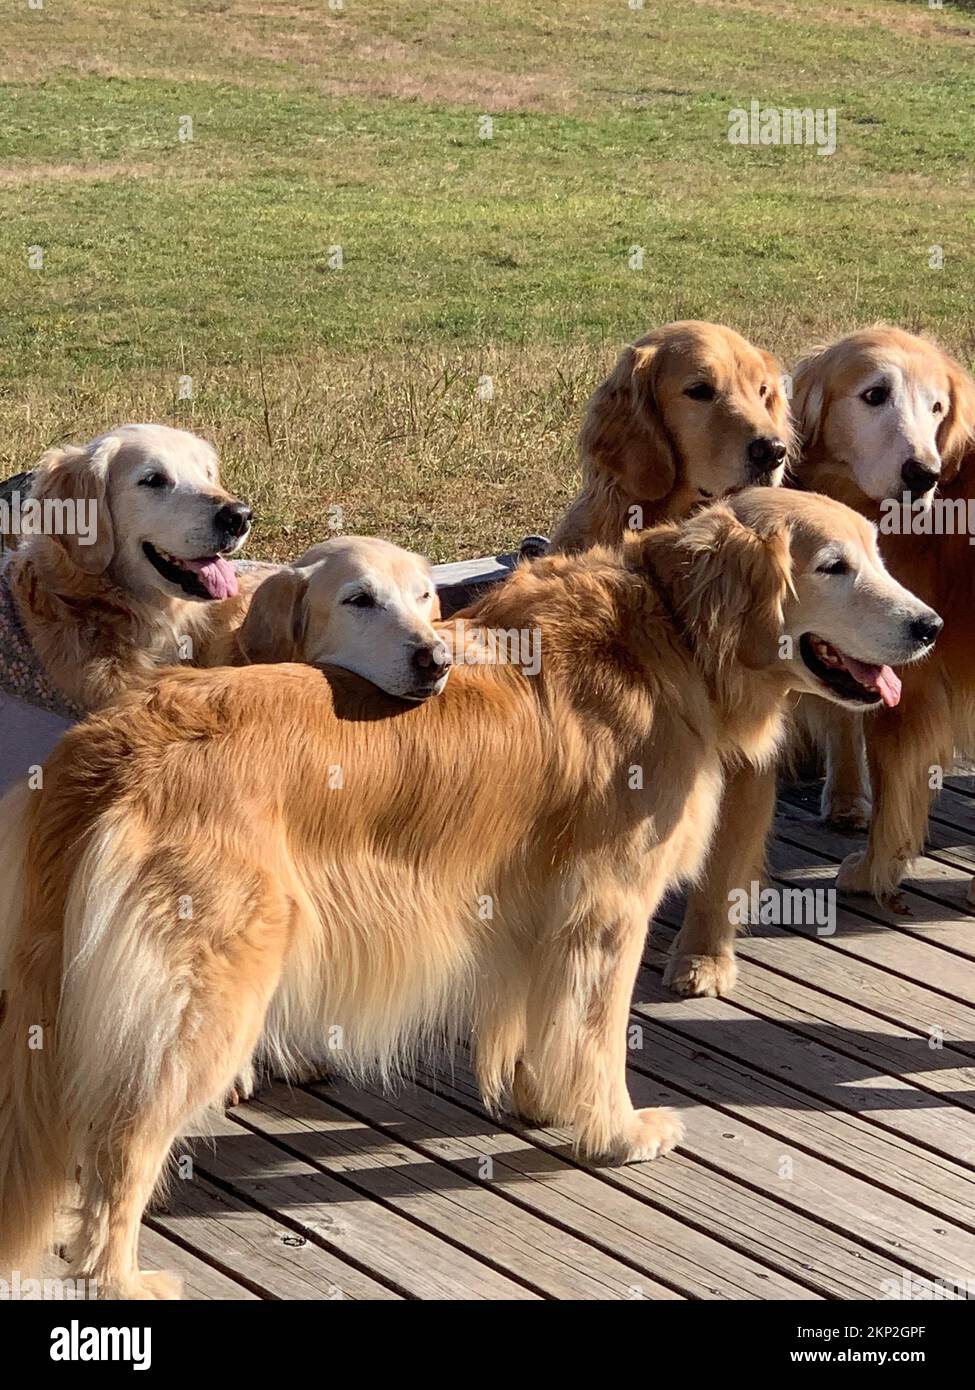 A vertical shot of golden retriever dogs standing on the wooden surface in the park on a sunny day Stock Photo